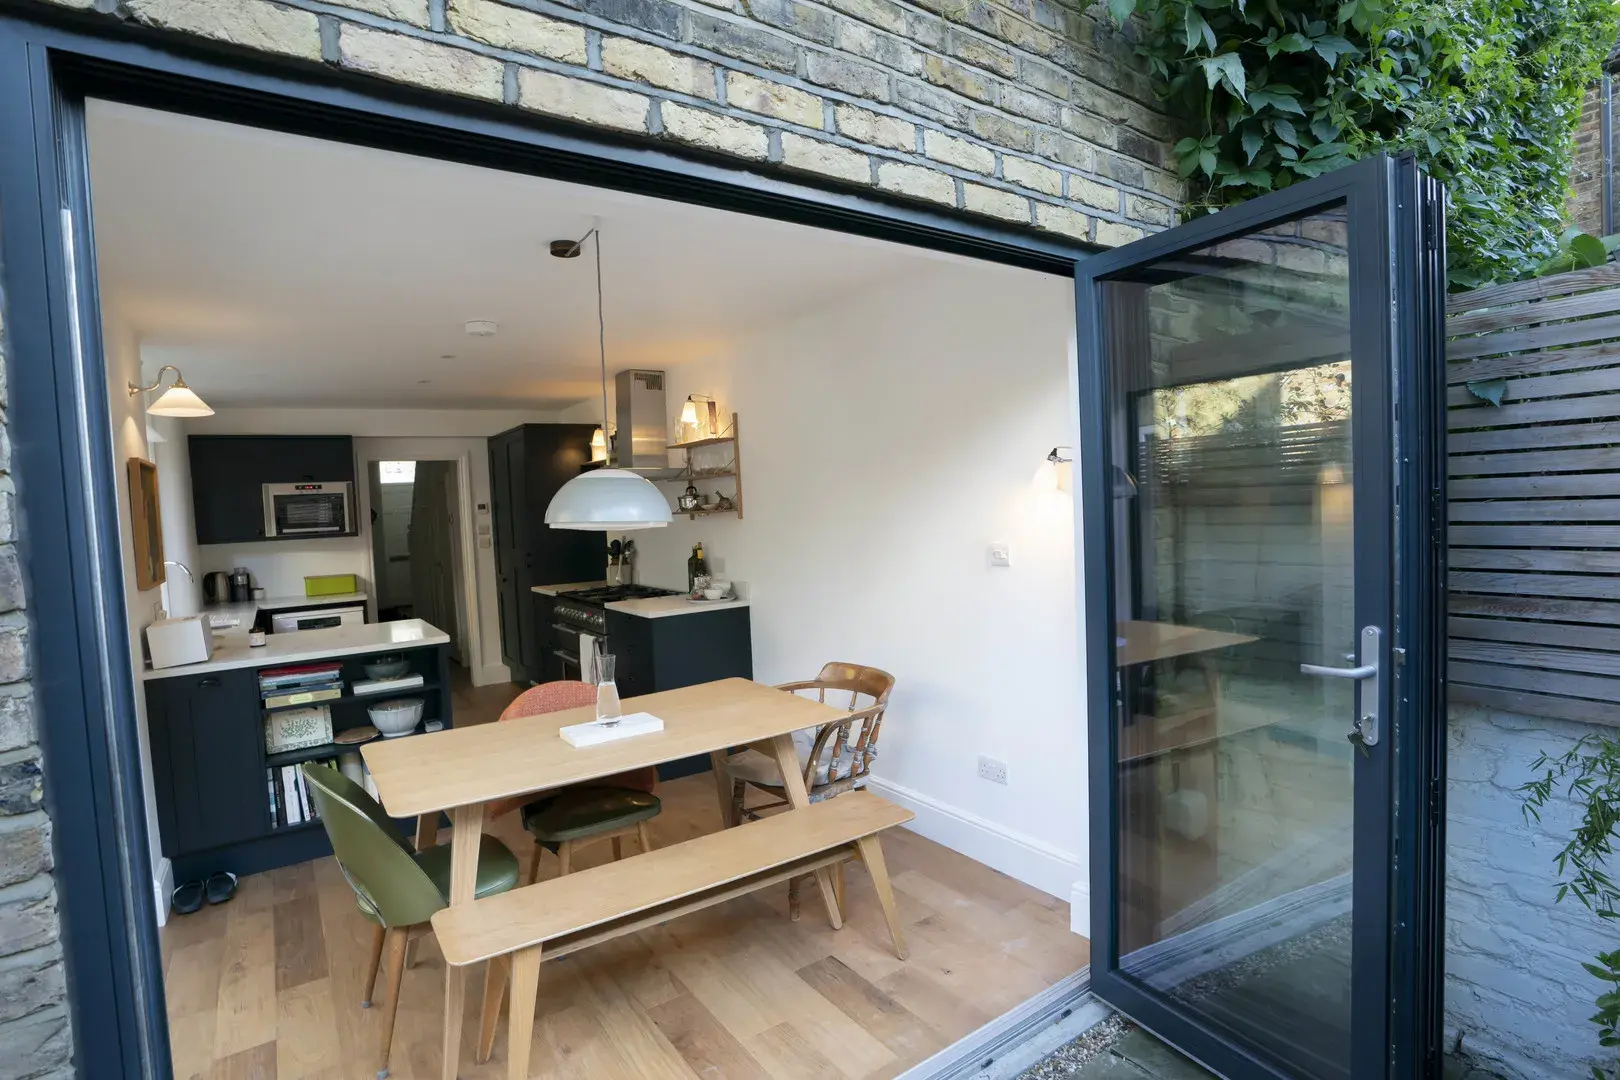 Strahan Road, holiday home in London